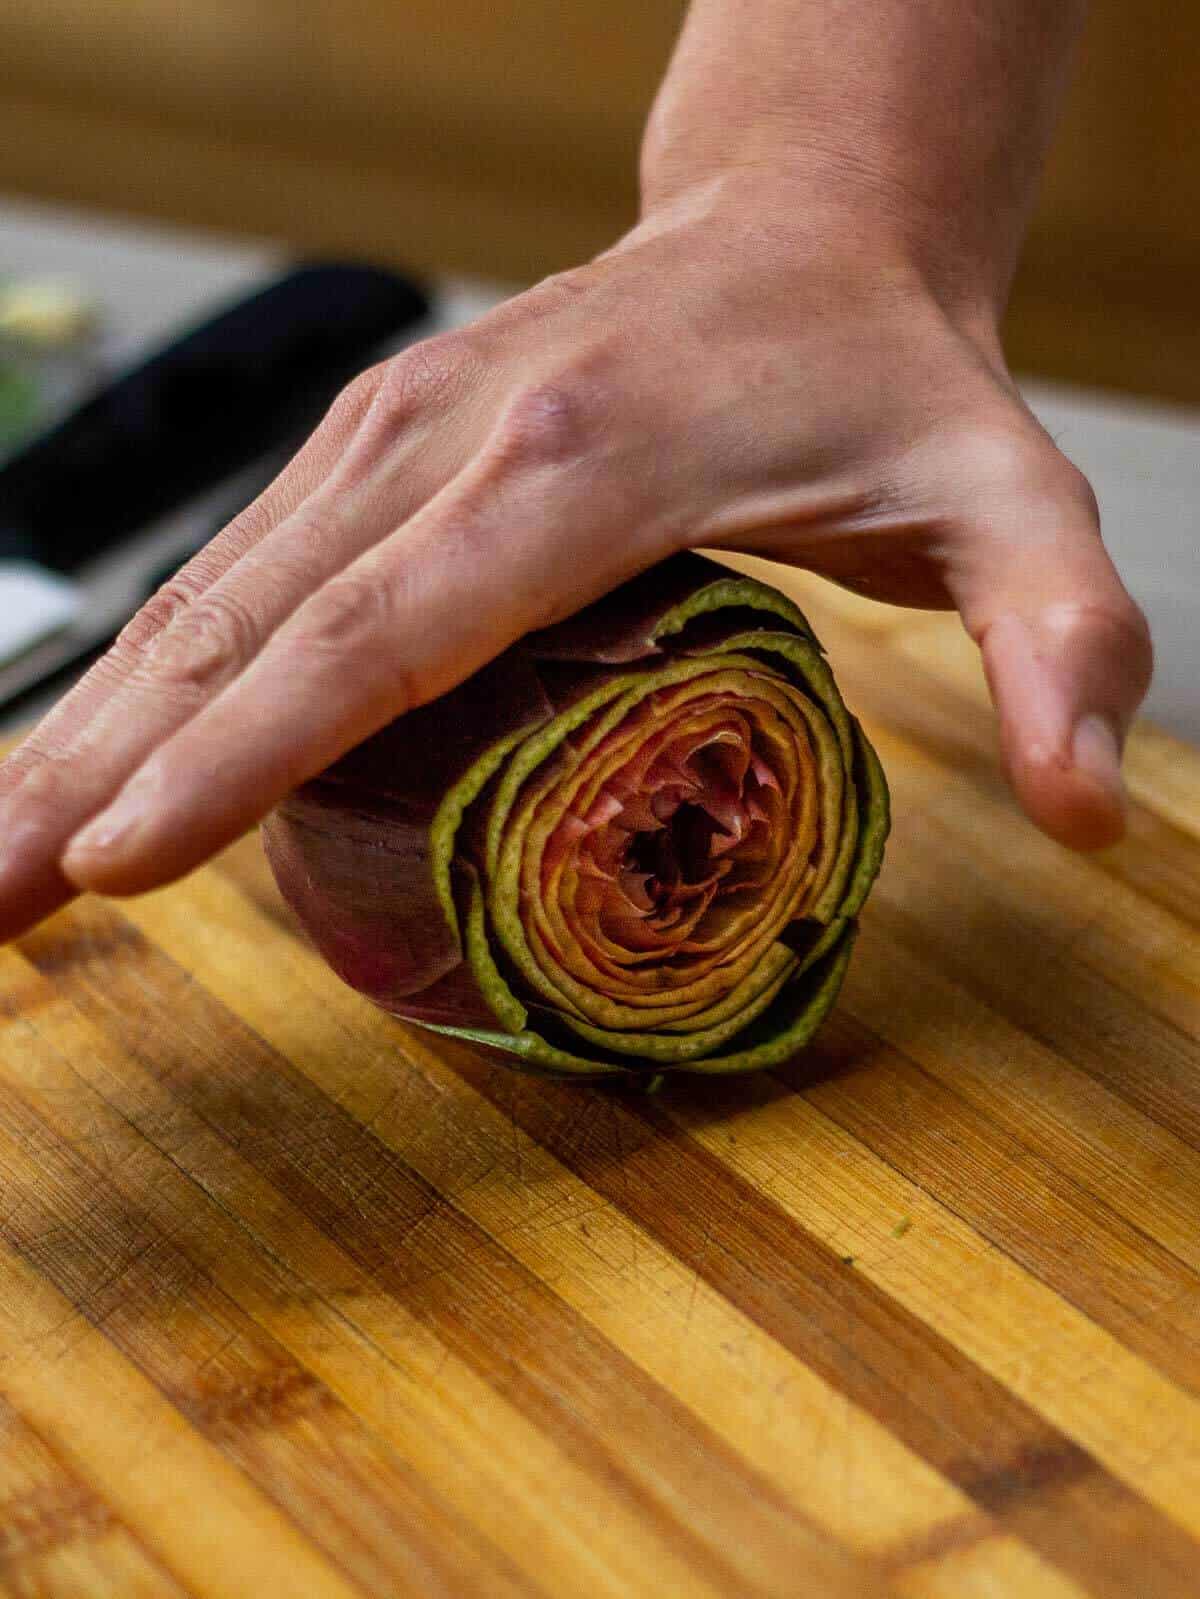 rolling artichokes to make them softer